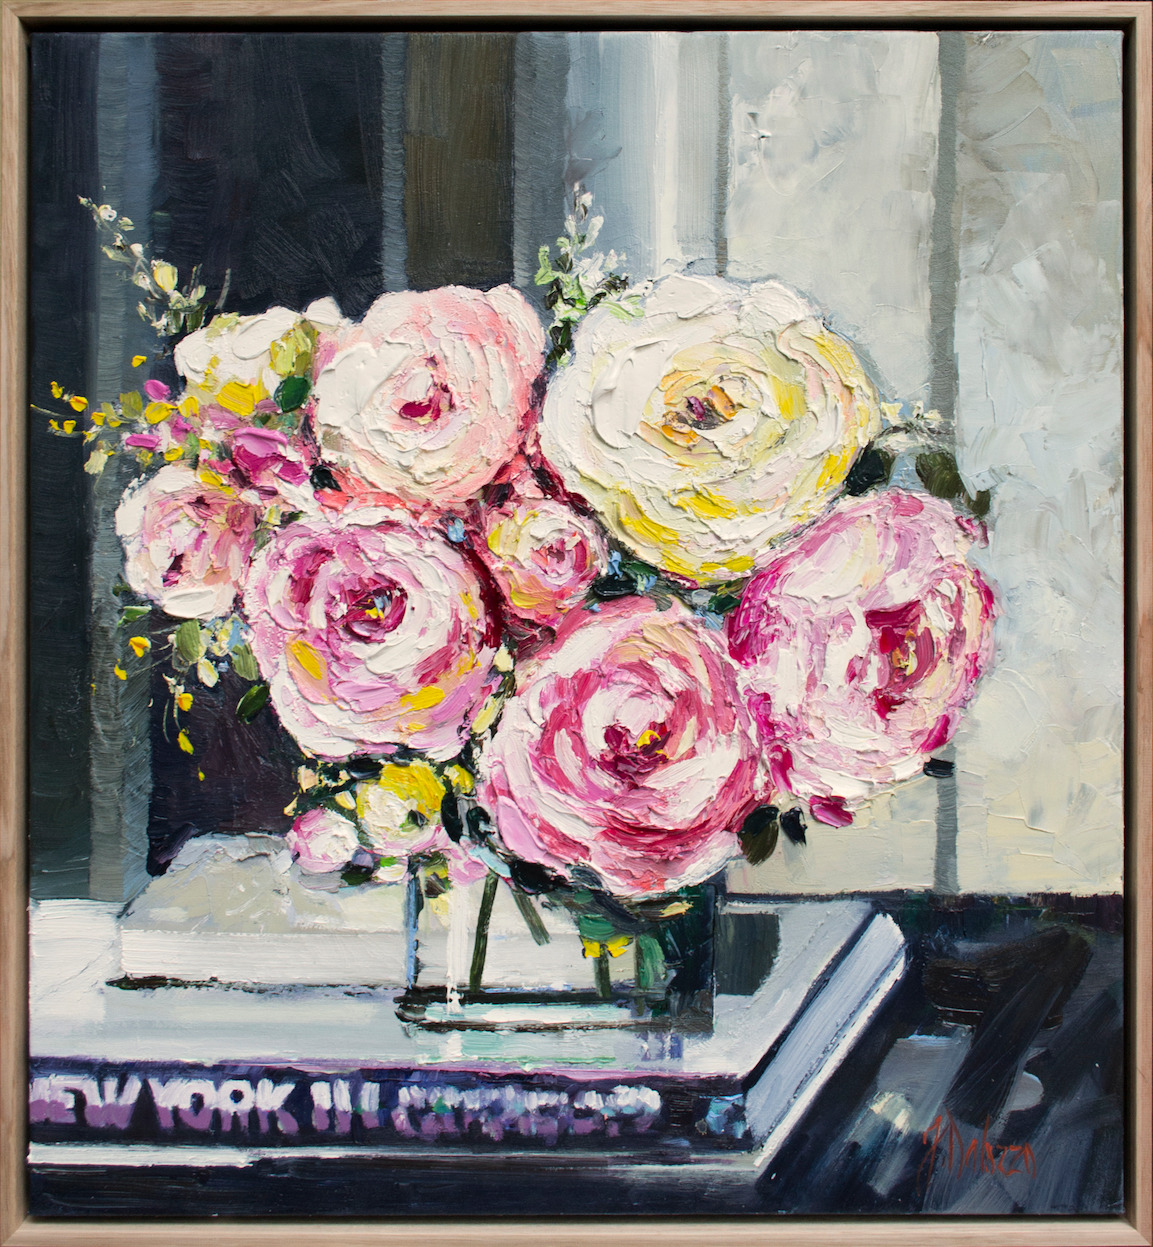 Framed Front View Of Still Life Painting "Your Special Day" By Judith Dalozzo